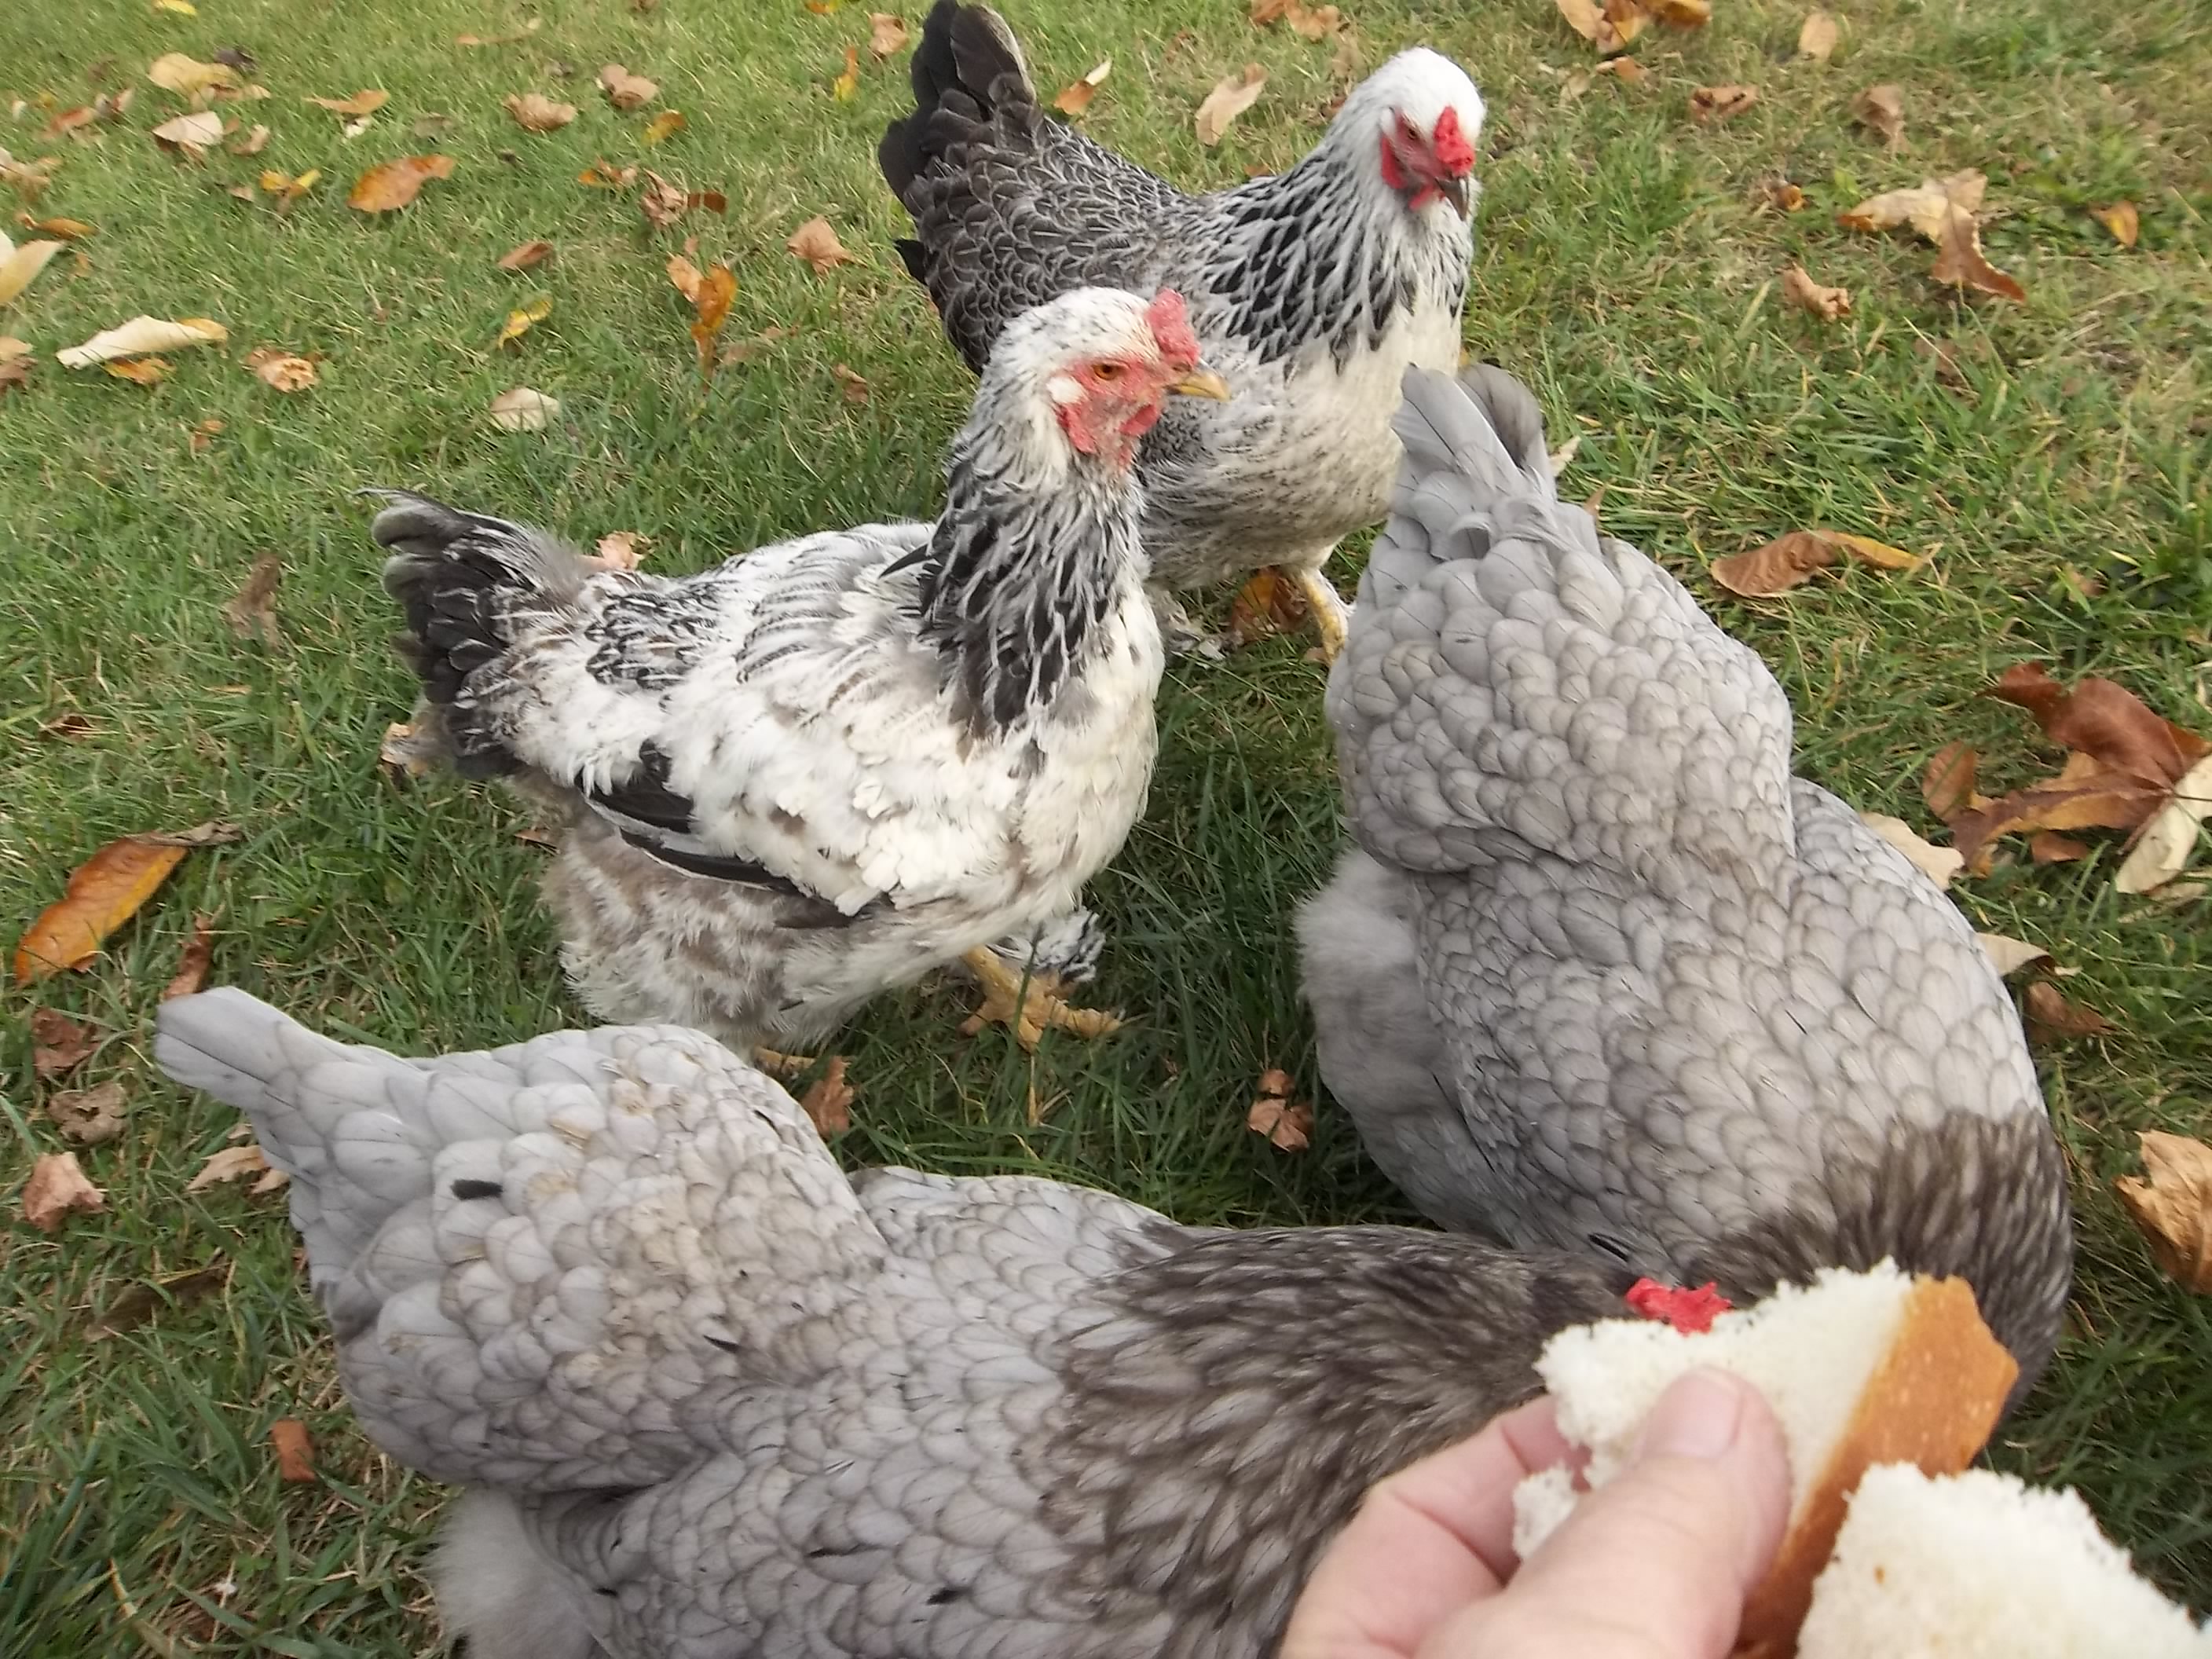 One in far back is rescue chicken "Big Momma" lays large brown eggs, alot of times double
yolk. Next one in on left "Old Lady" 5 or 6 yr old rescue doesn't do anything. Two fluffy greys forward are cochins, "Henny Penny" Laying and "BB" who is brooding. I also have a red hen from the rescue bunch. Their flock was picked off by chicken hawk and they were given to me.
So far my boy and his girls are so spoiled they stay practically on the back porch.